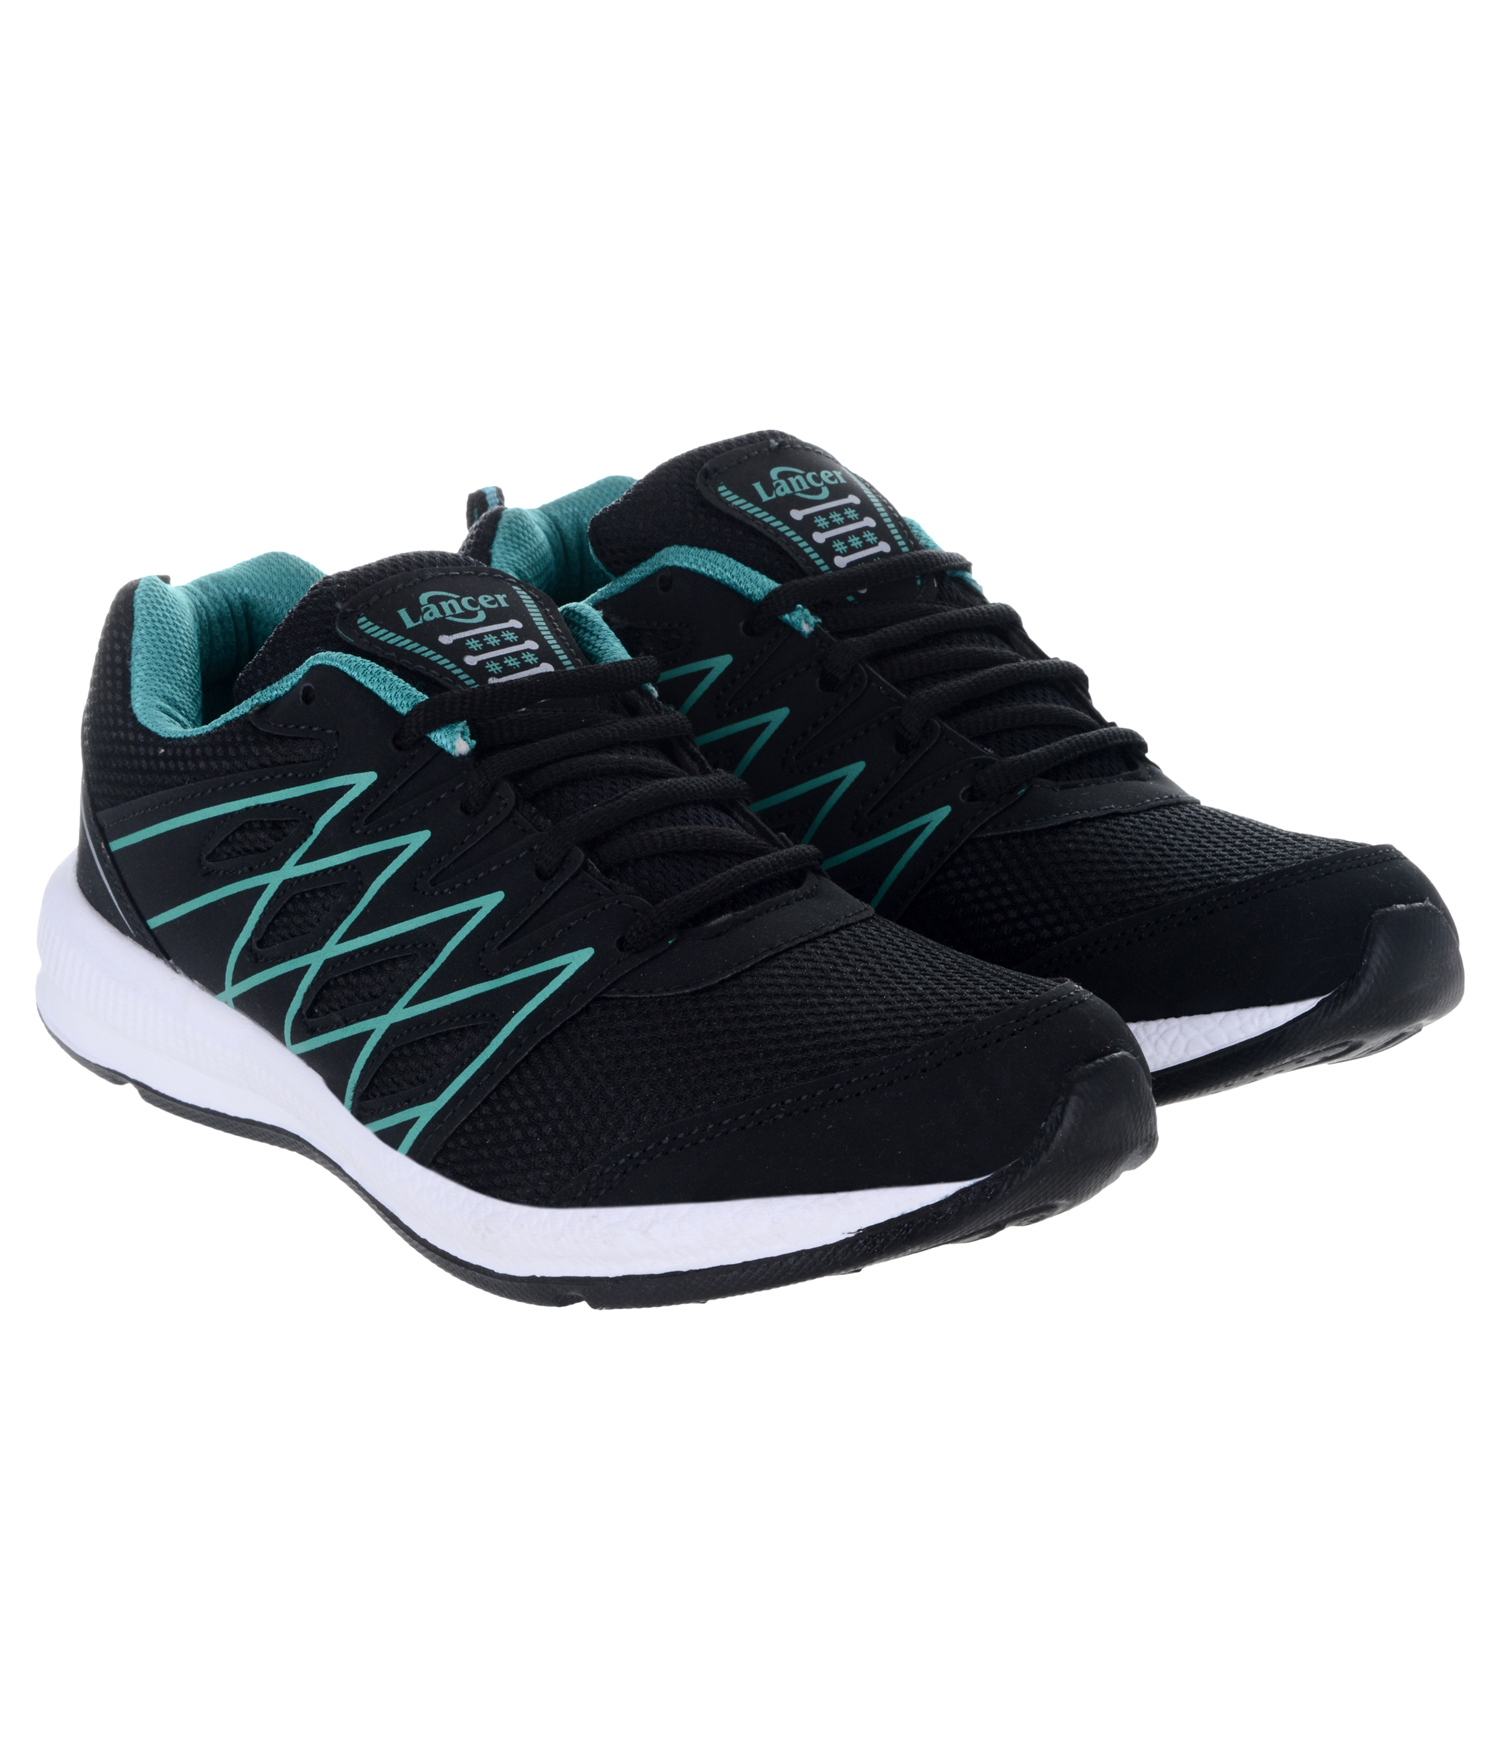 Buy Lancer Black Green Shoes Online @ ₹499 from ShopClues